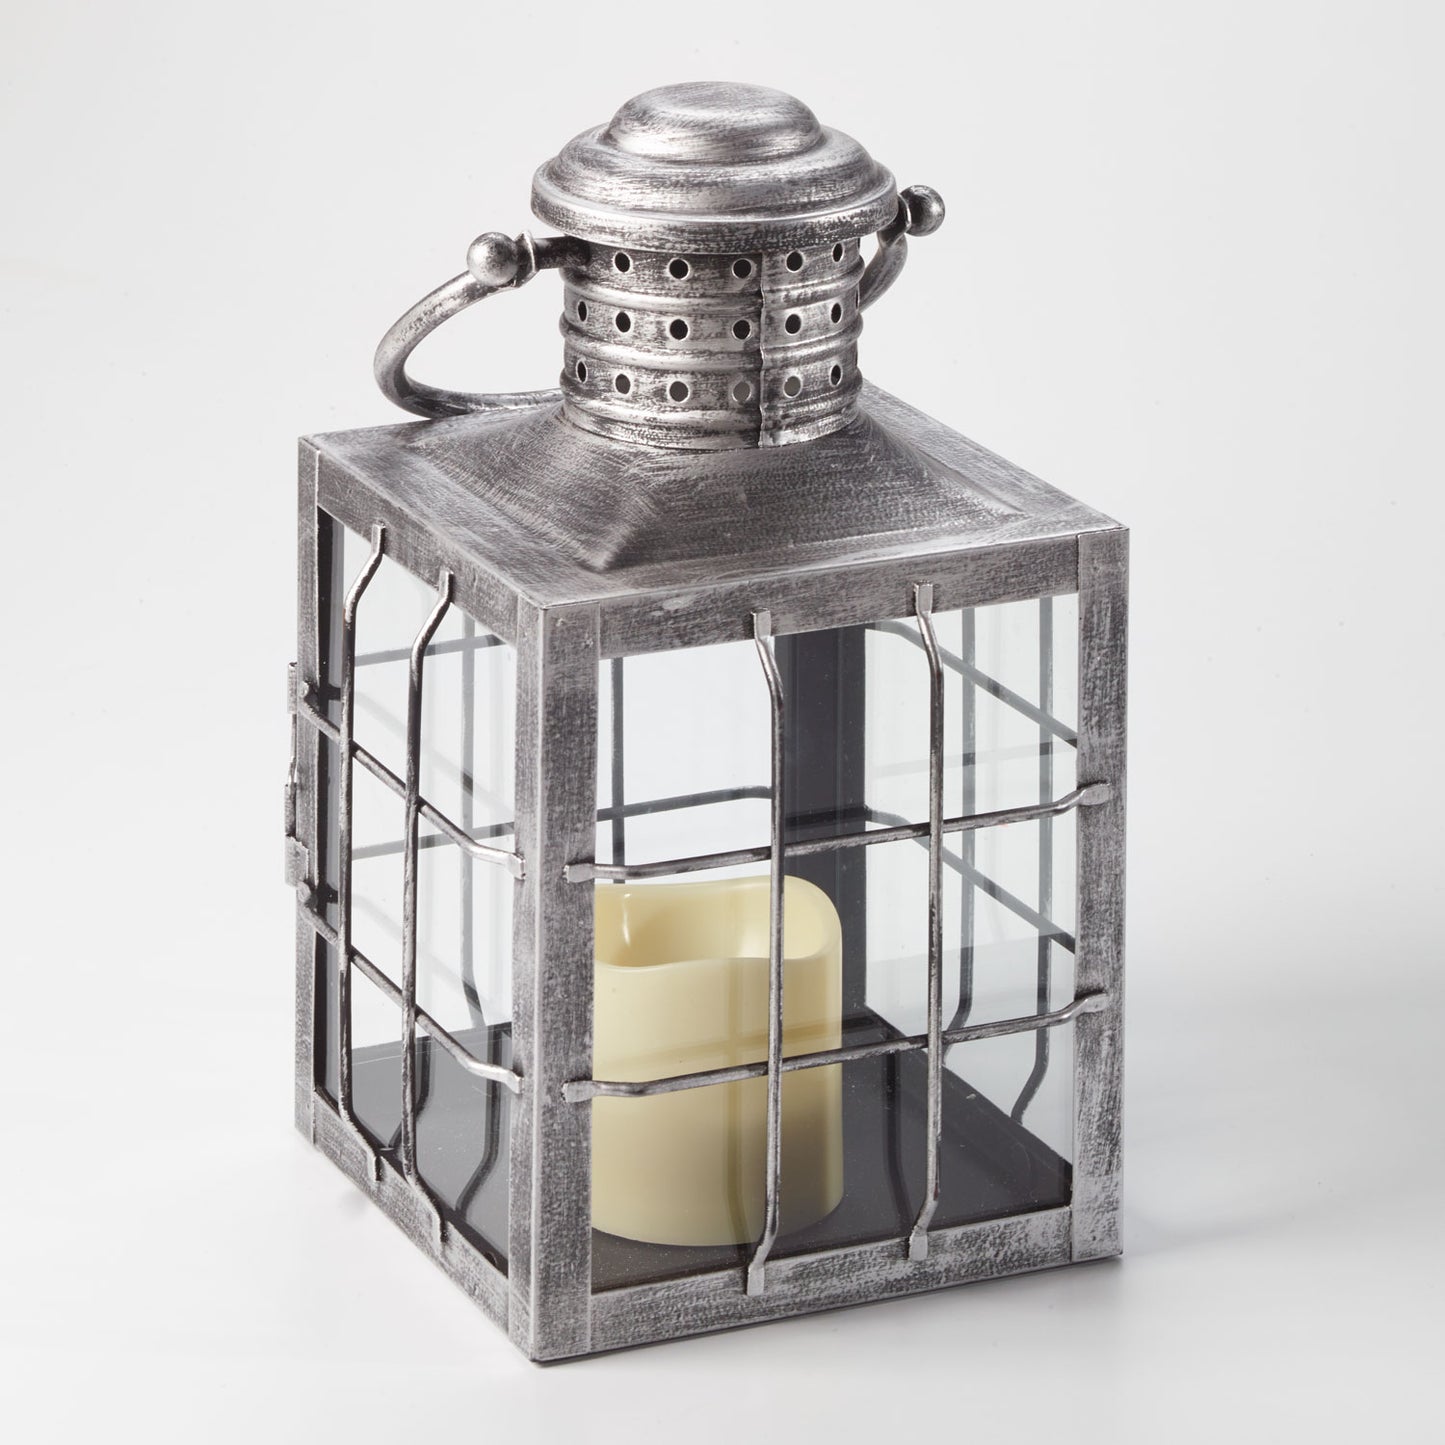 Charles LED Candle Lantern - Antique Silver